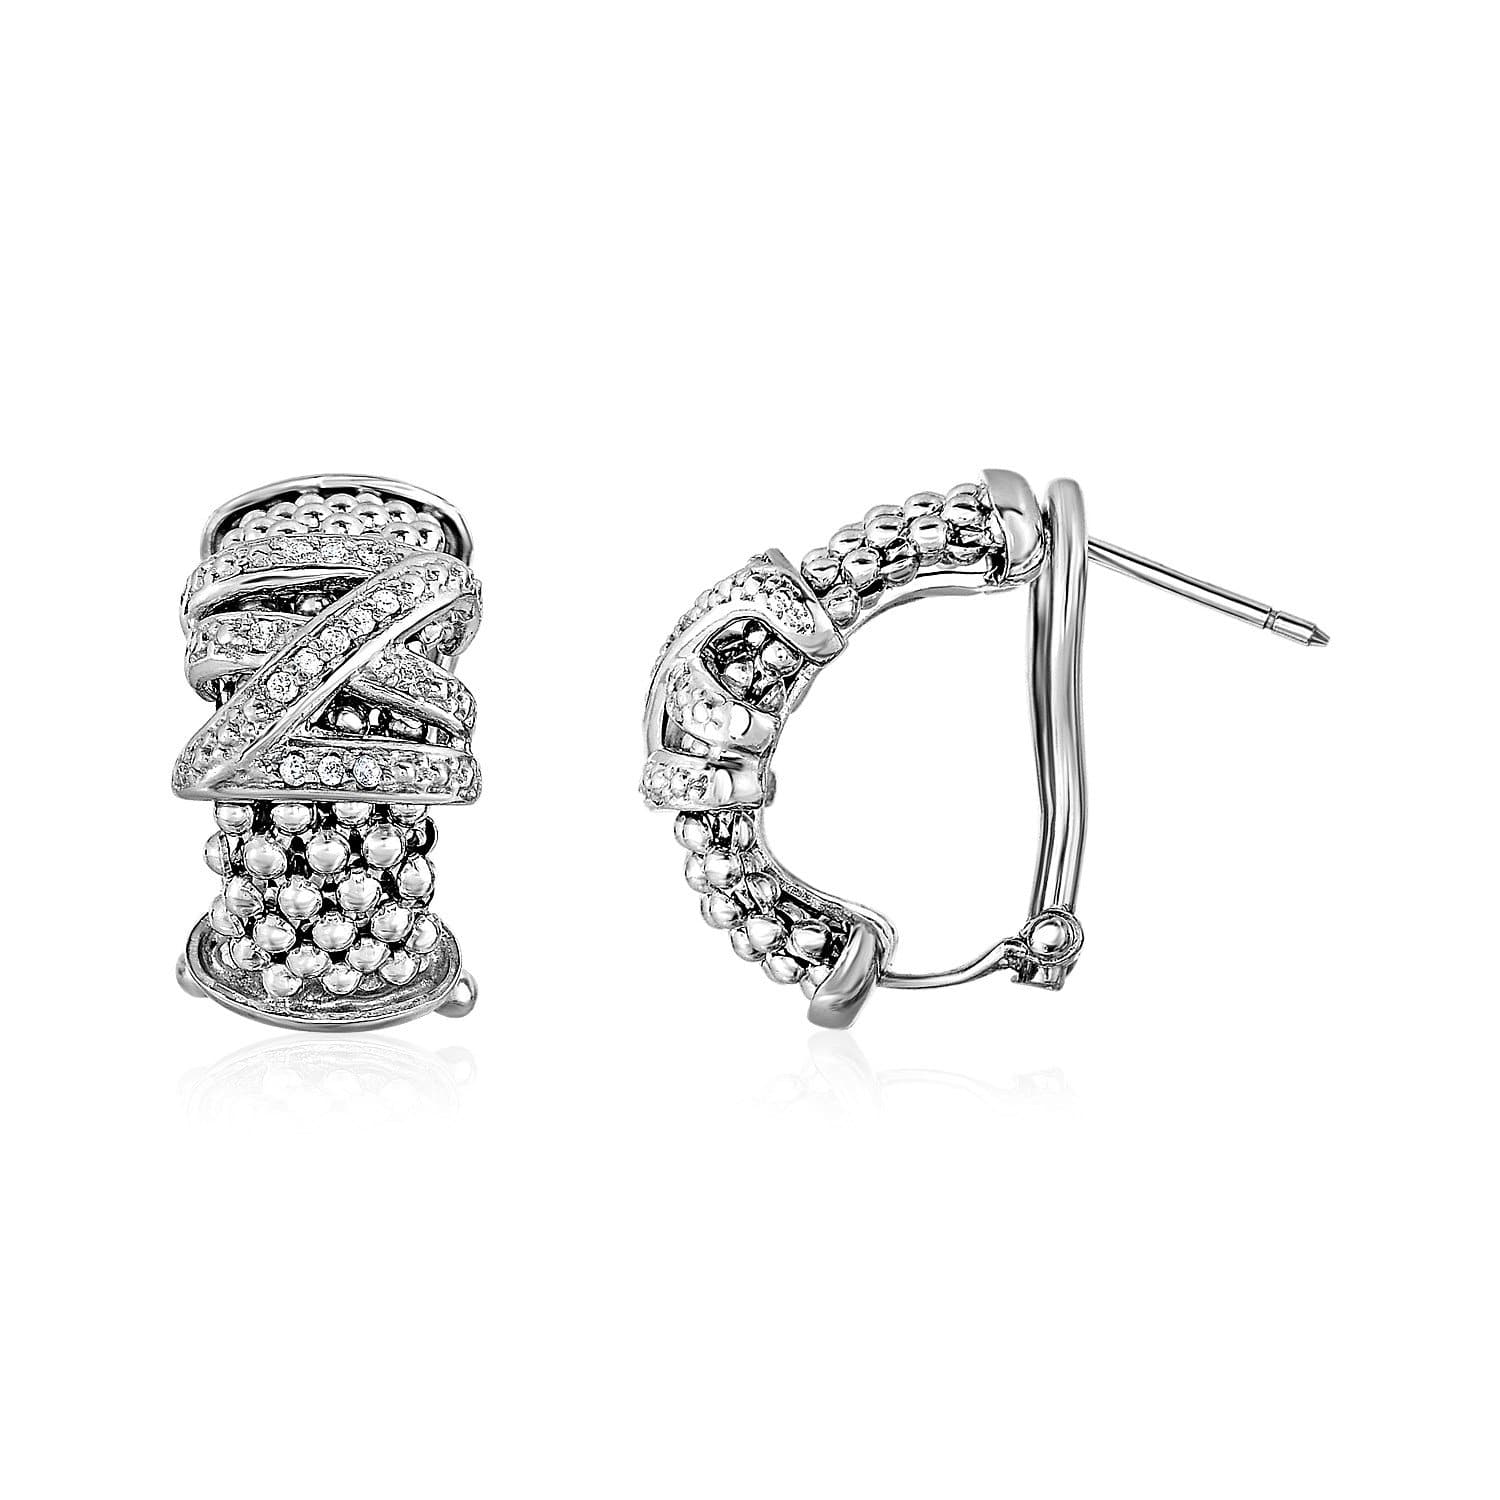 Popcorn Texture Earrings with Crossover Motif and Diamonds in Sterling Silver